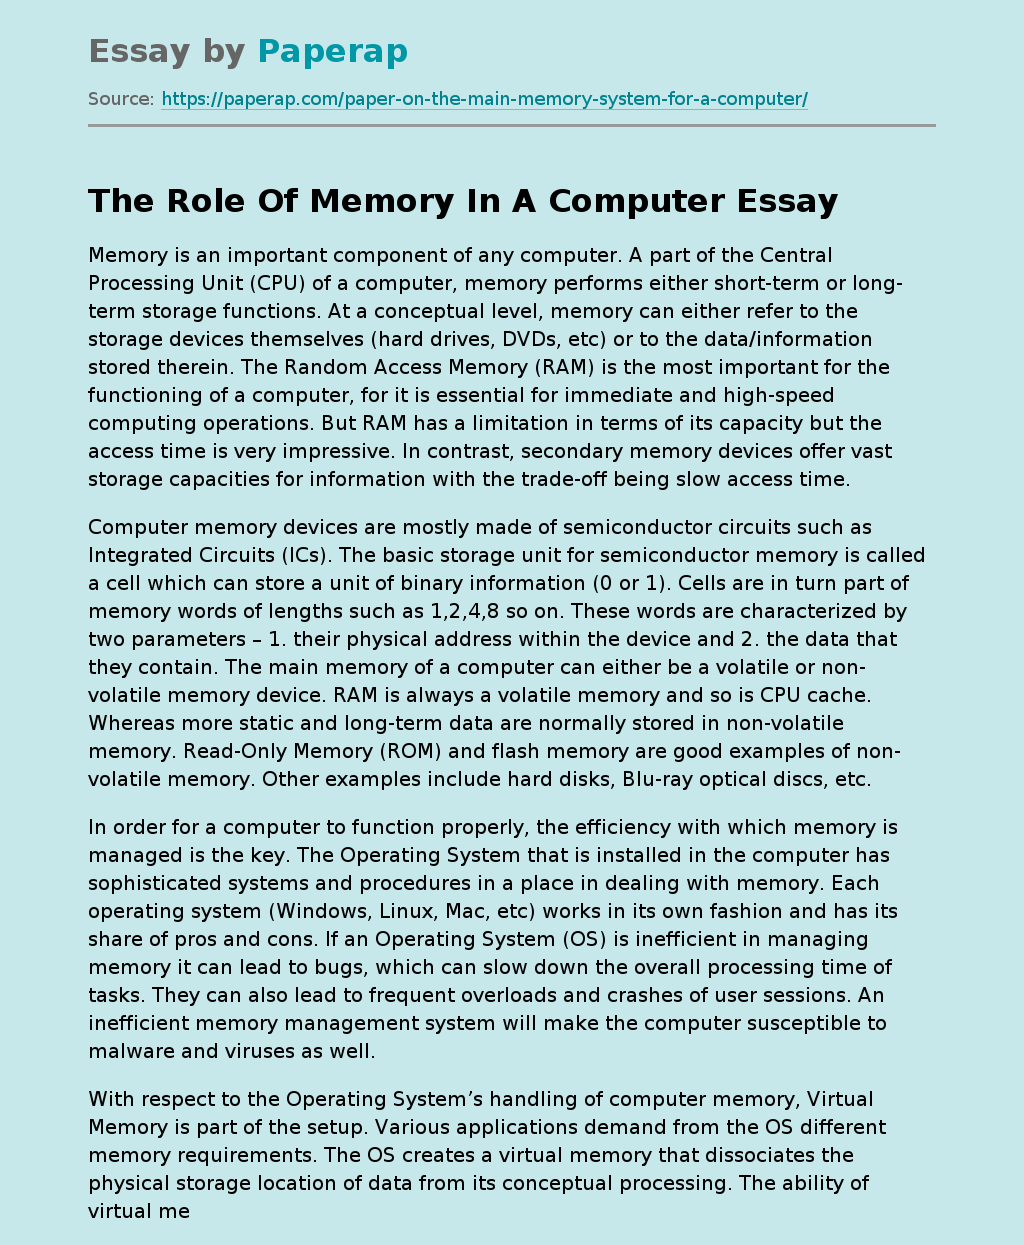 The Role Of Memory In A Computer